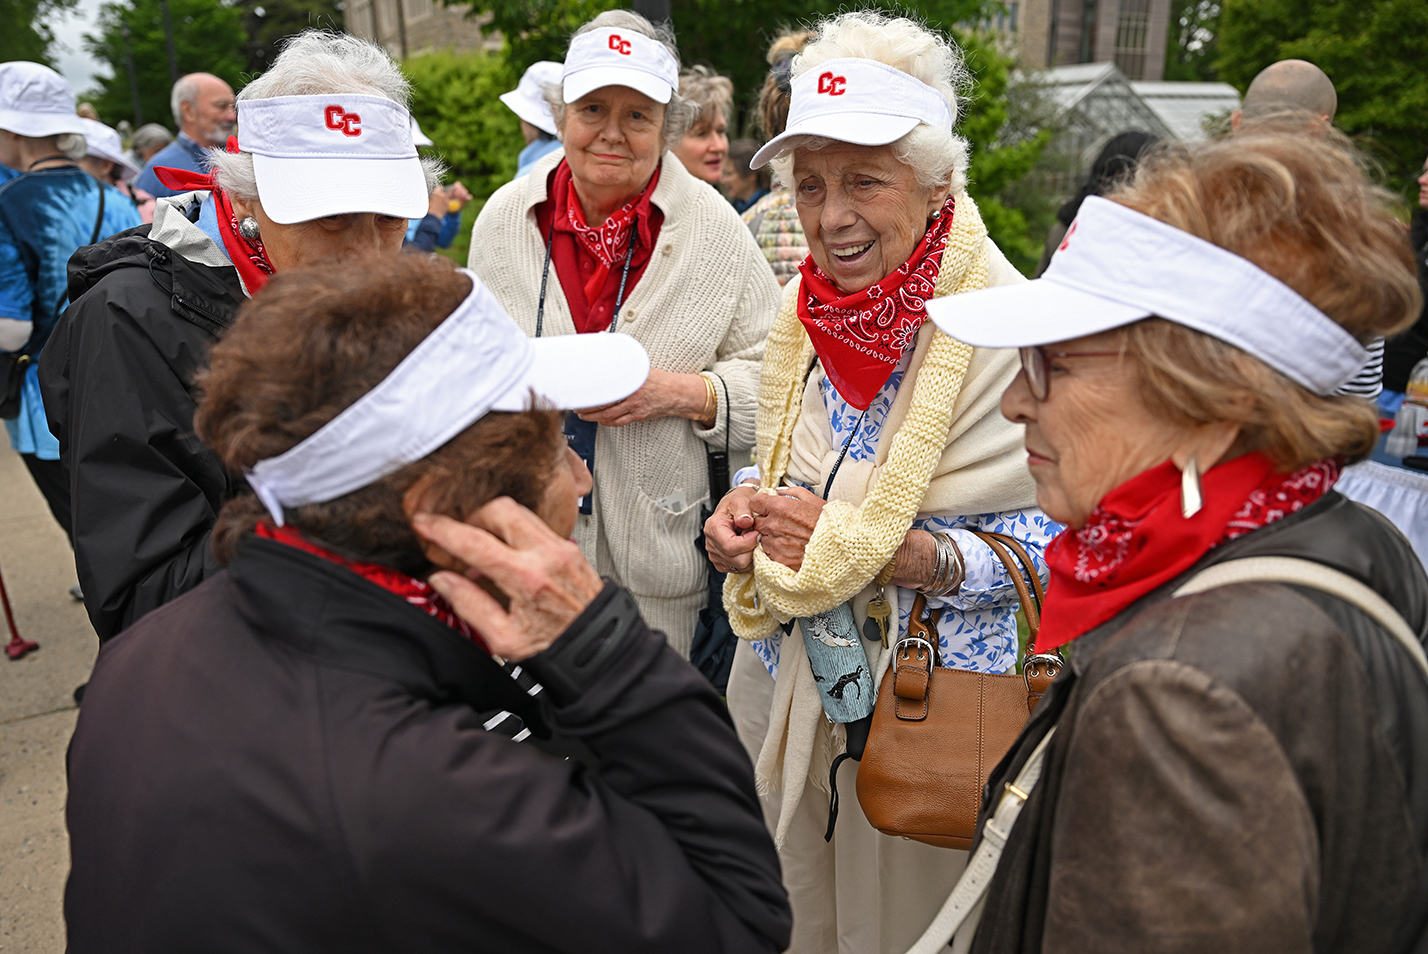 A group of alumni meet before the class parade